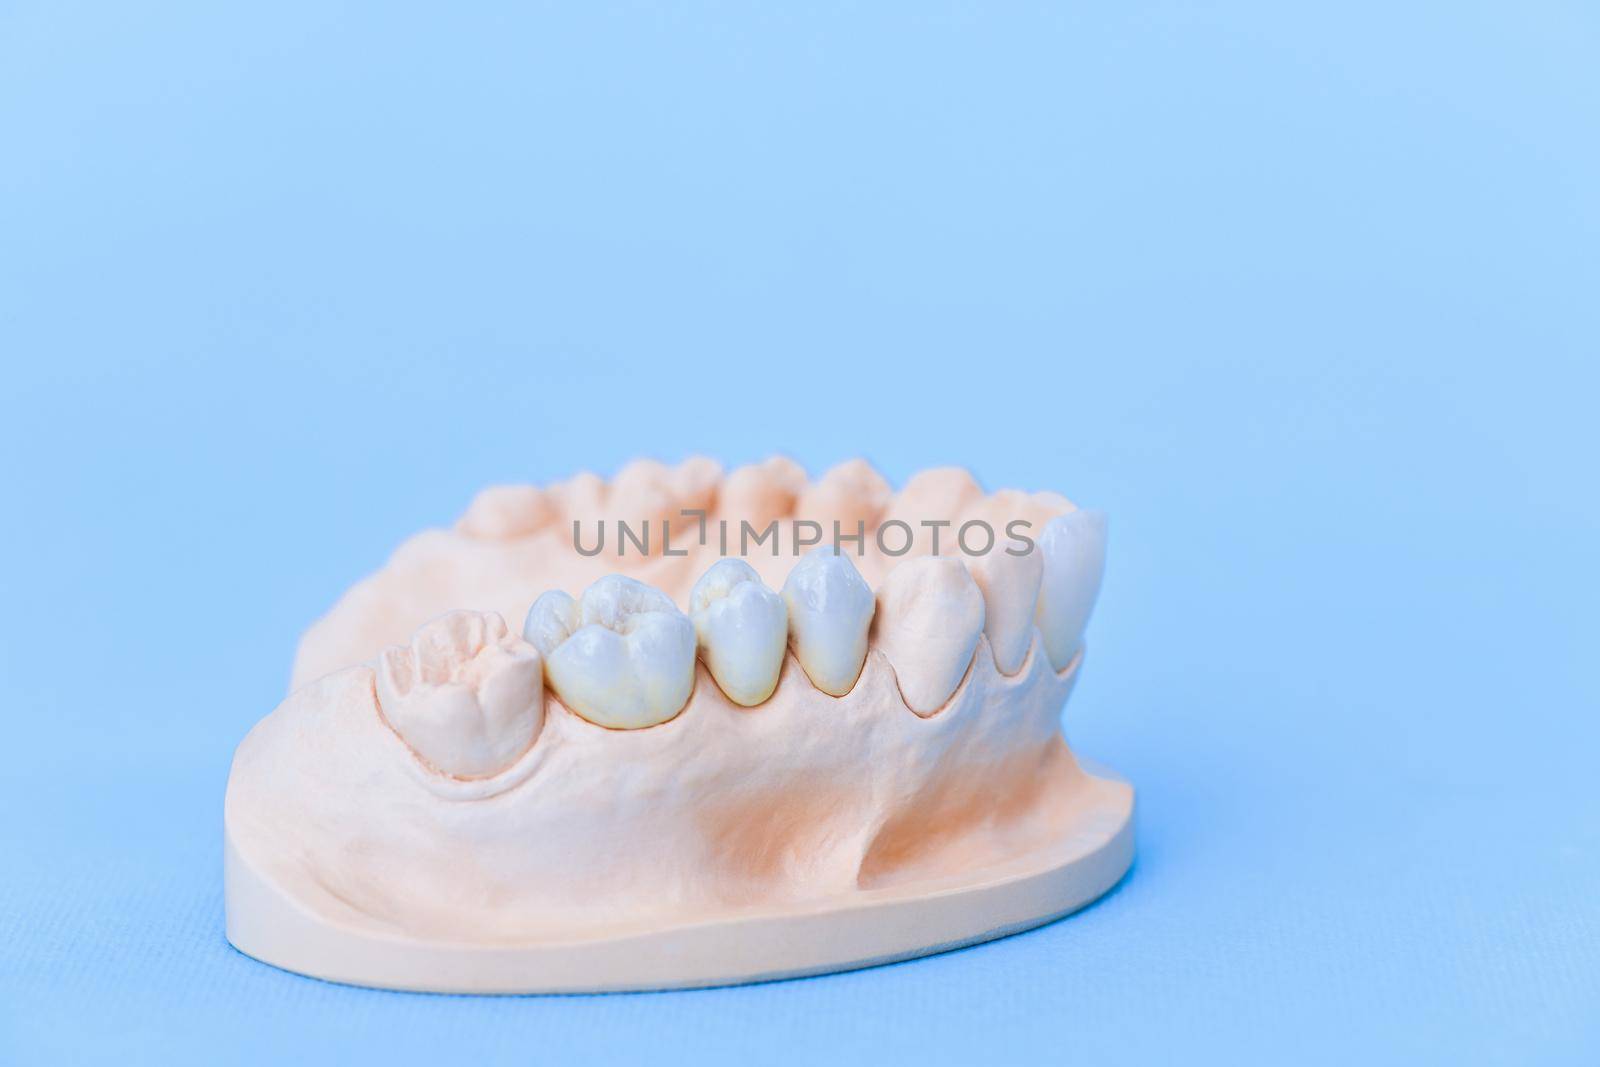 Gypsum model of human jaw with teeth on a blue background